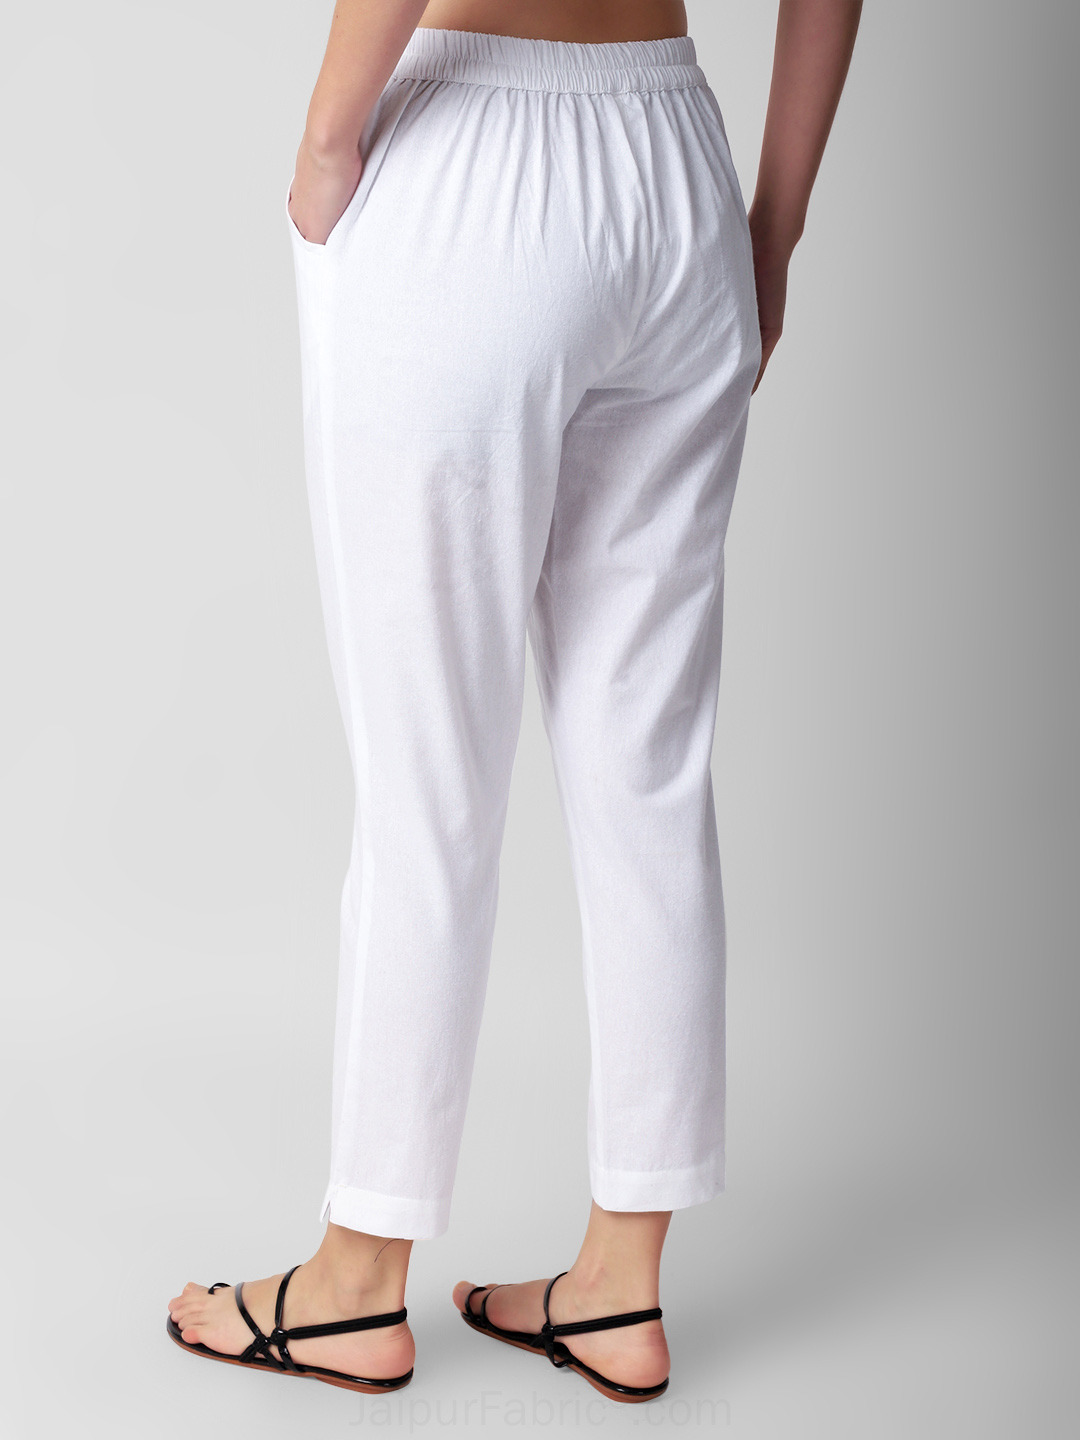 Snow White Women Cotton Pants casual and semi formal daily trousers